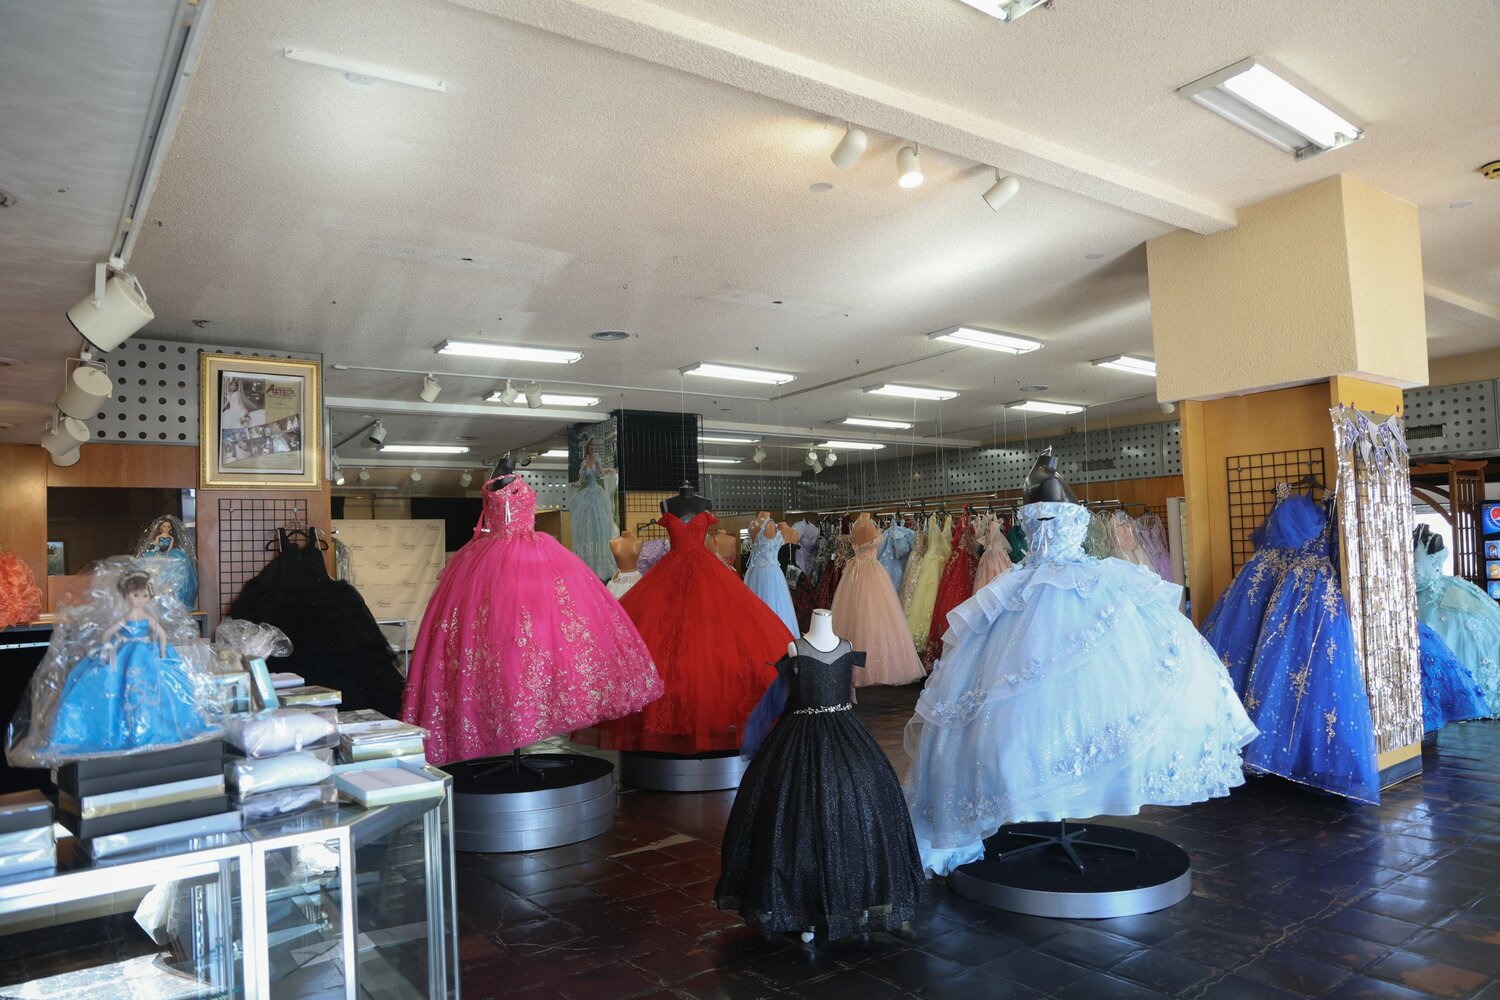 A selection of quinceañera dresses at Azteca Bridal in Phoenix on Nov. 21. (Photo by Sam Volante/Cronkite News)